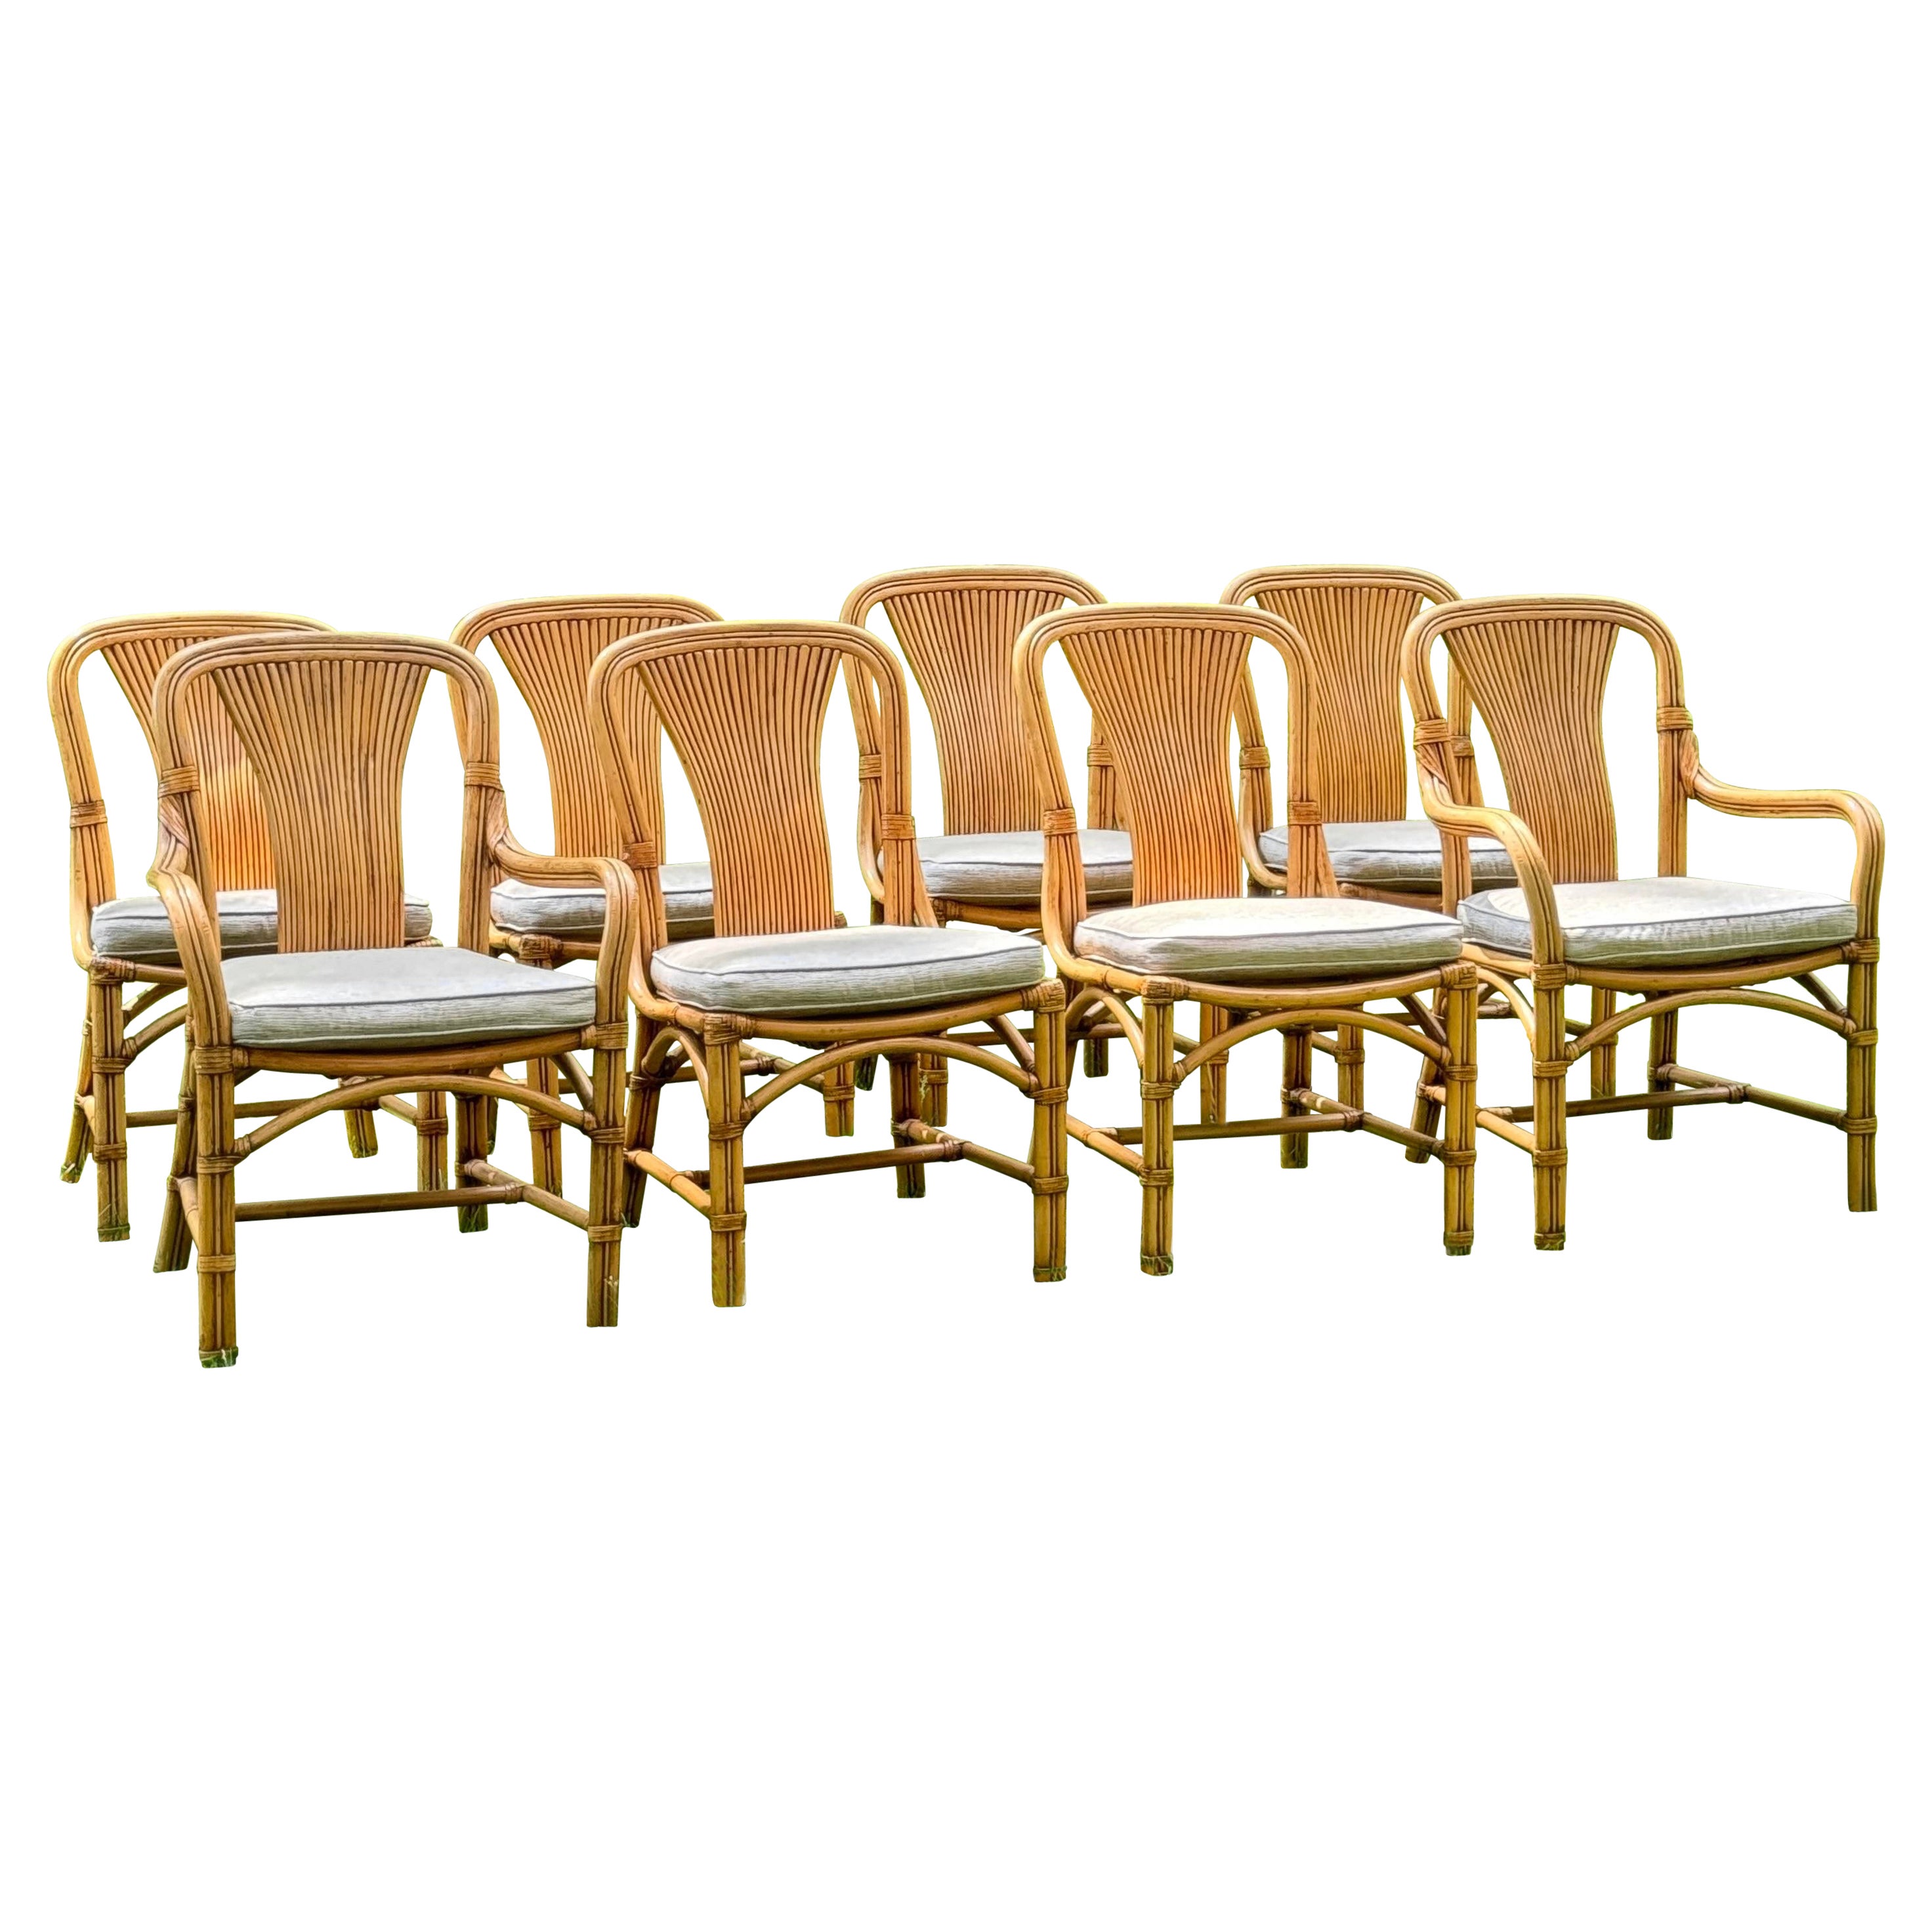 Palm Beach Regency Style Bamboo Dining Chairs With Curved Back - Set of 8 For Sale